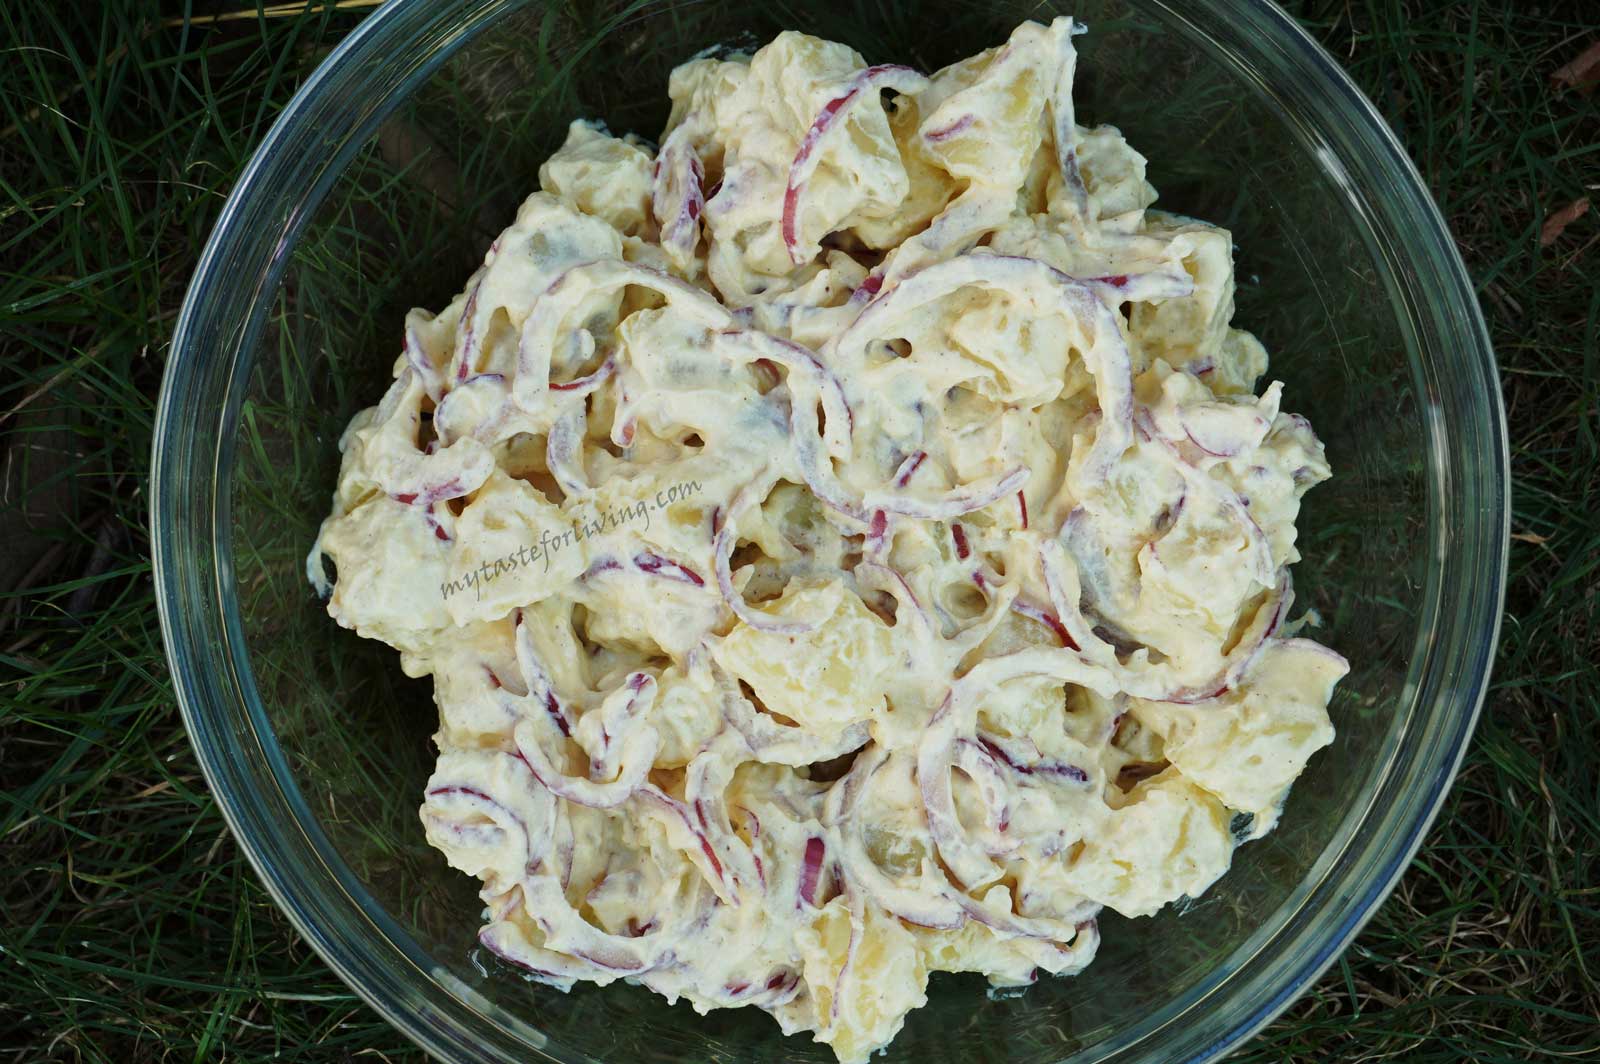 I offer you an easy and delicious recipe for potato salad with skyr, mustard and red onion. Skyr is an Icelandic dairy product, fat-free, but with much more protein.